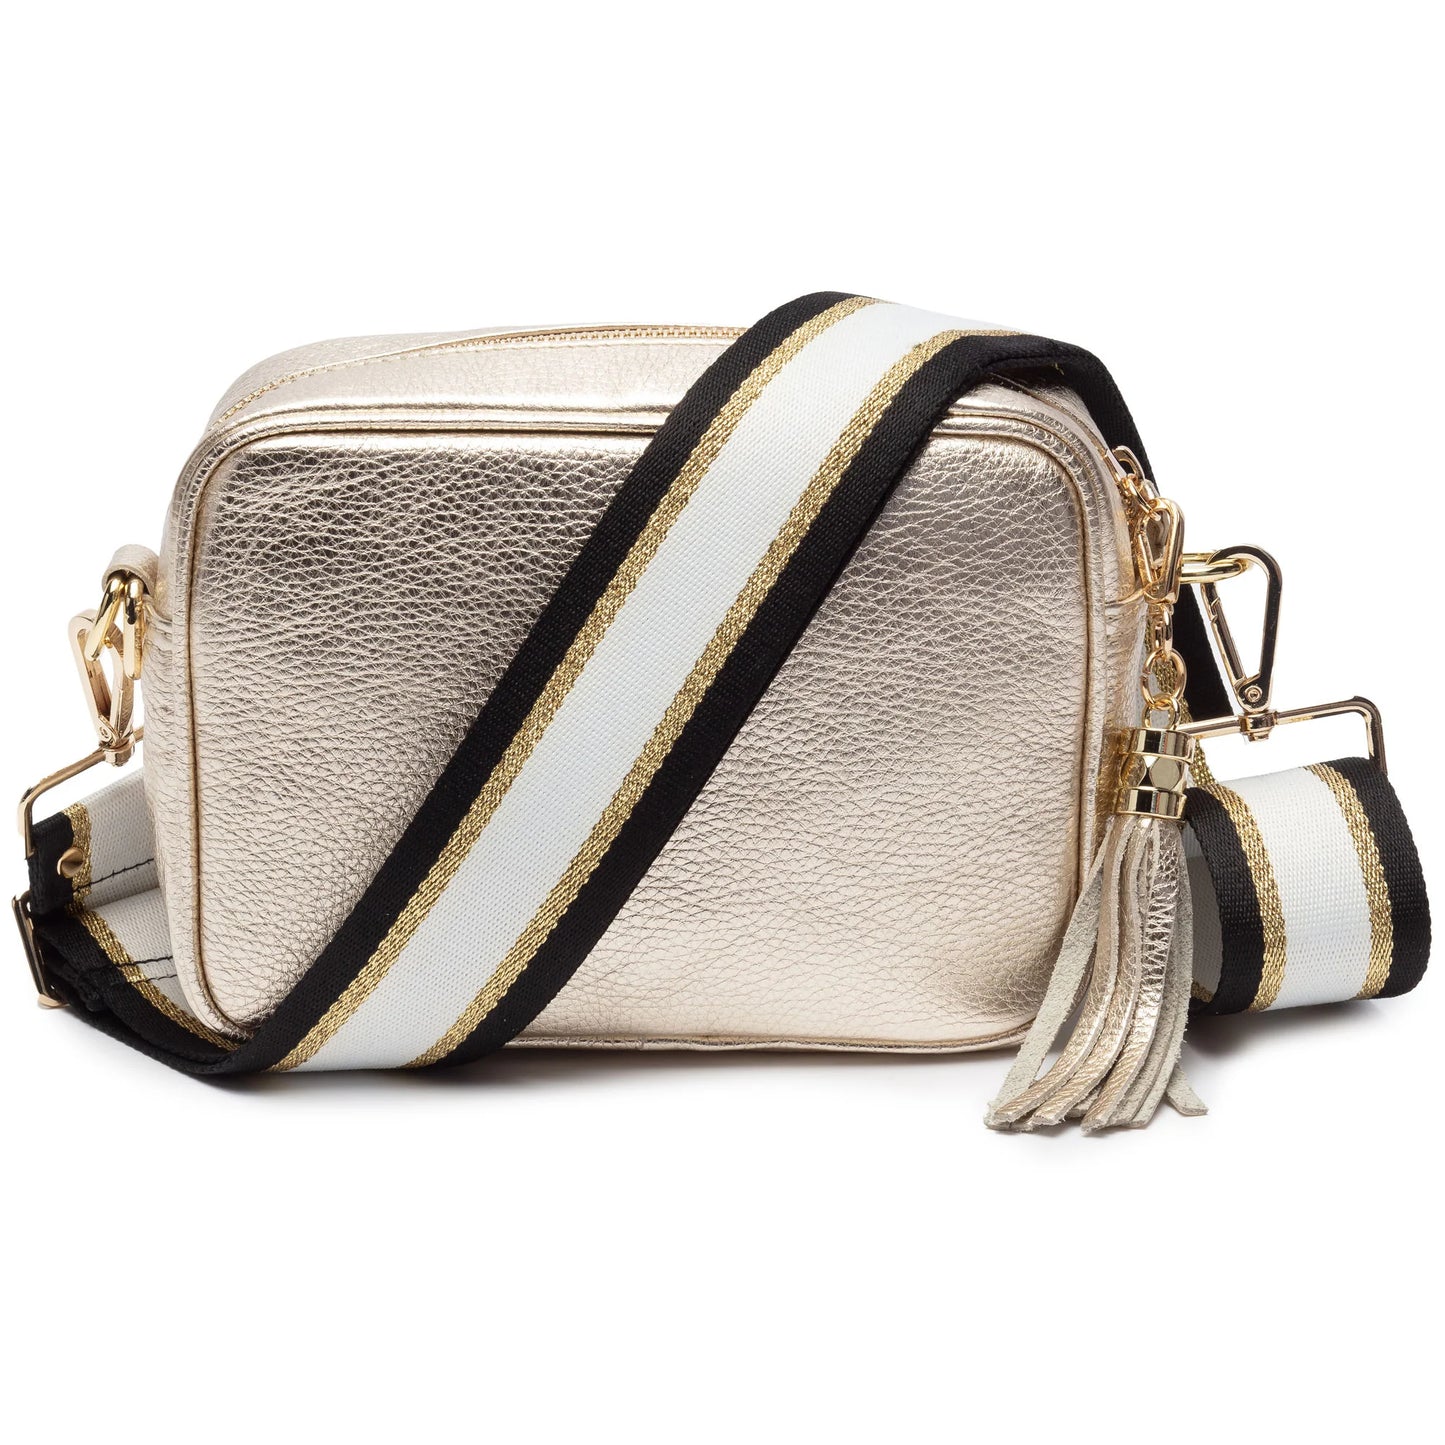 Elie Beaumont Gold Leather Crossbody Bag